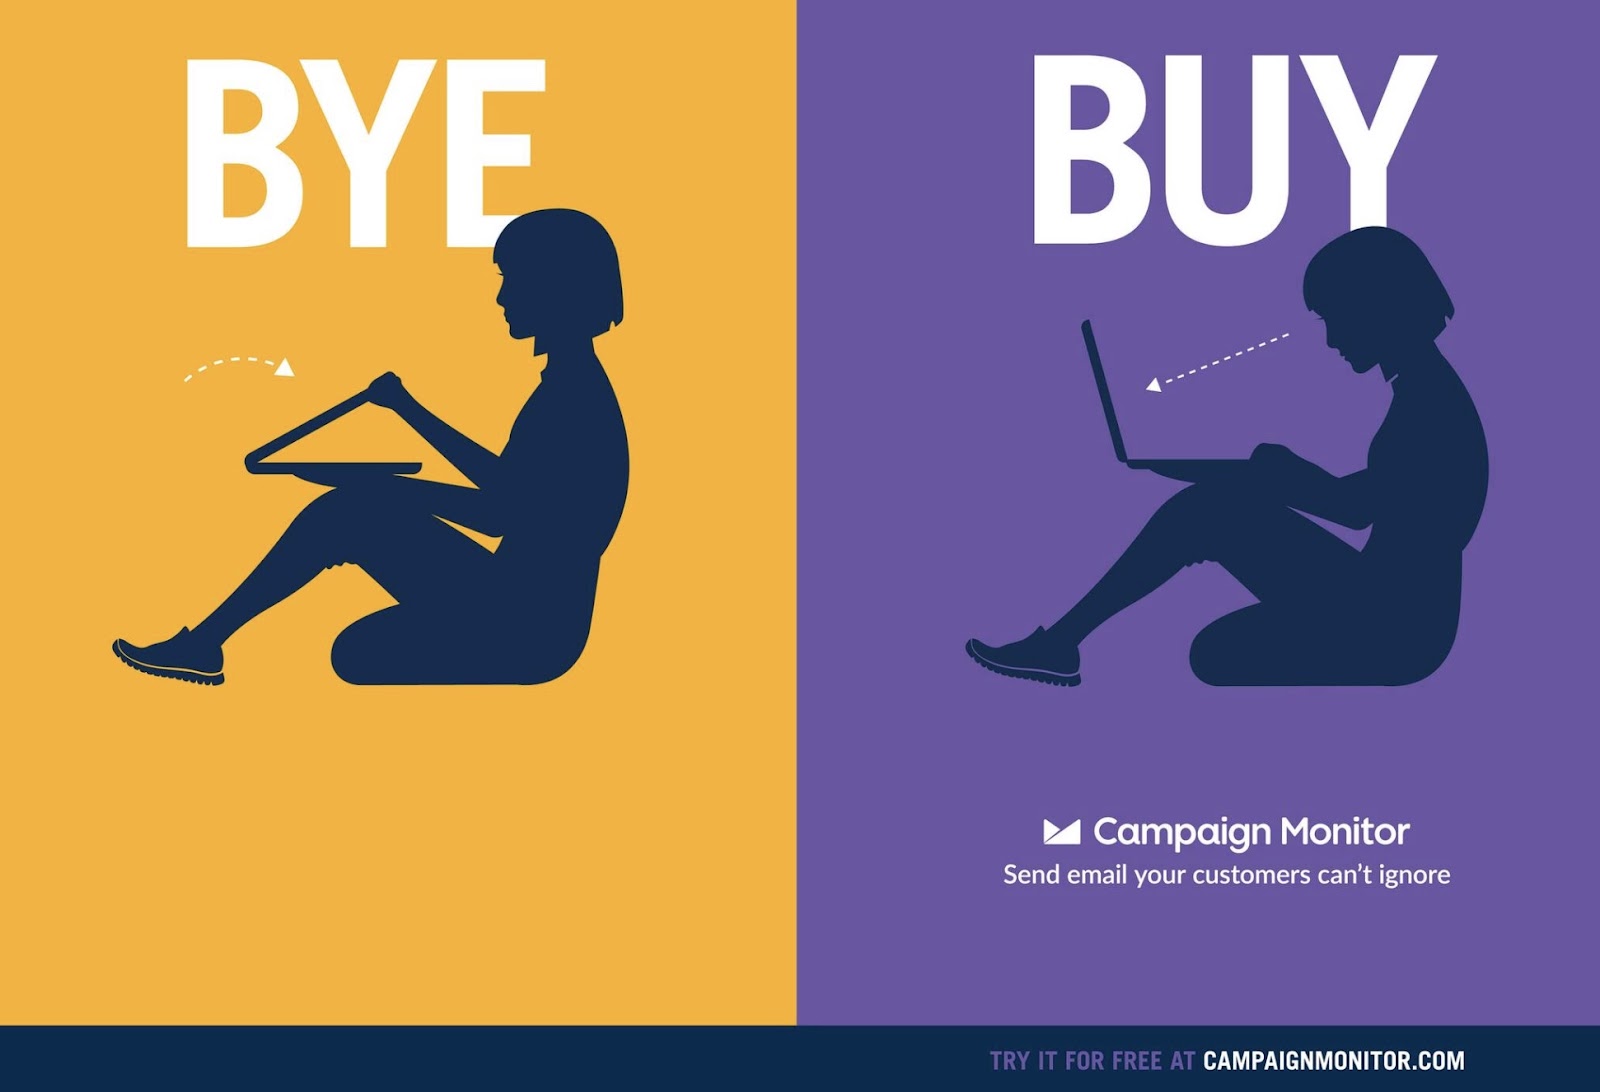 Campaign Monitor's ad with a person closing the laptop on the left ("bye") and a person looking at the screen on the right ("buy")